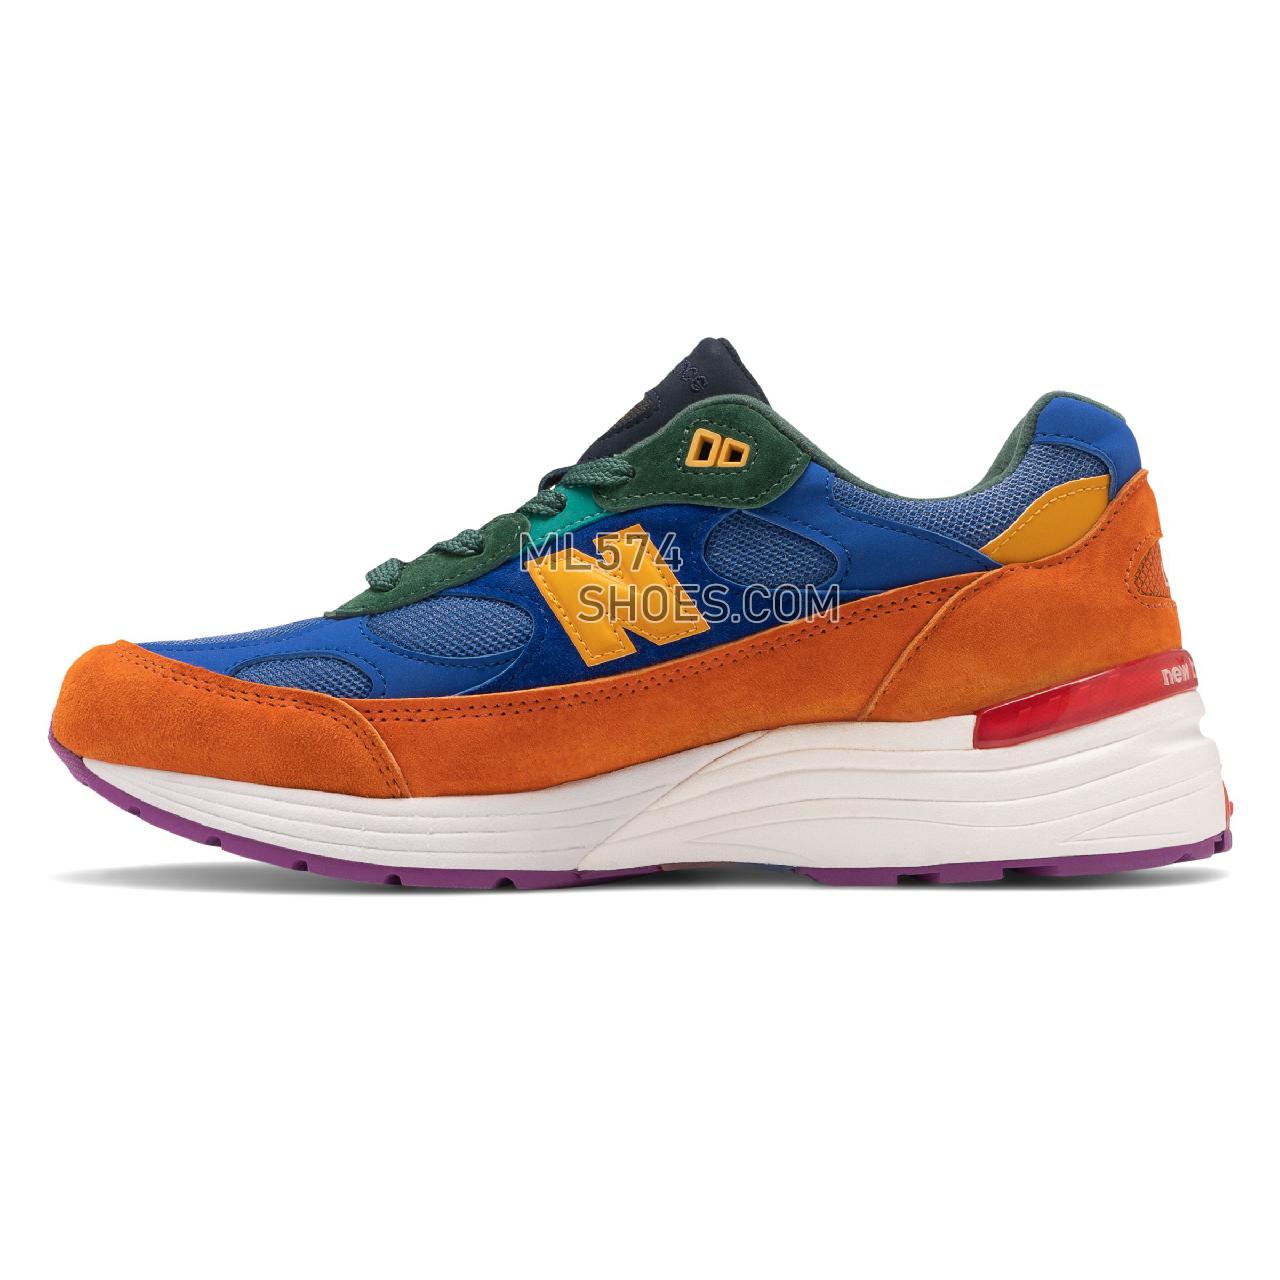 New Balance Made in US 992 - Men's Made in US 992 Classic - Orange with Blue - M992MC